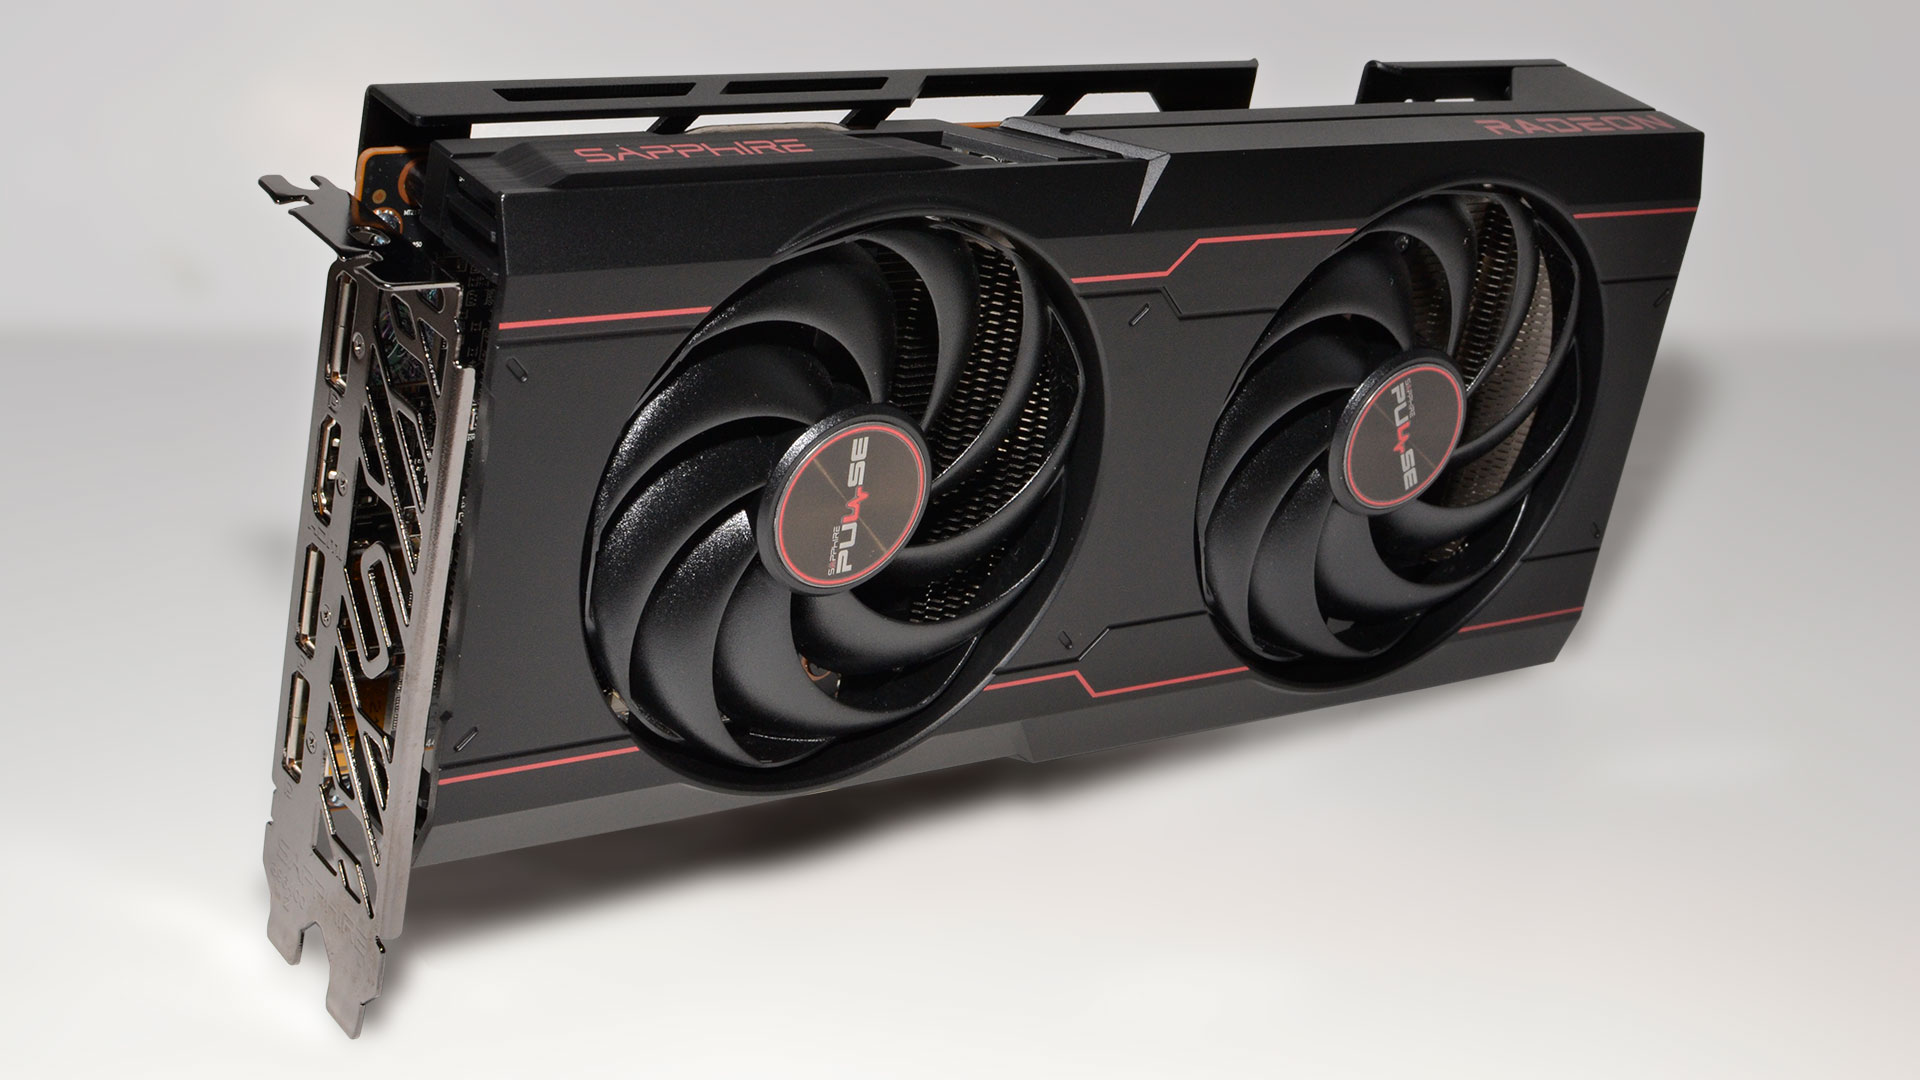 Sapphire Radeon RX 6600 XT Pulse Review: Compact and Just as Fast